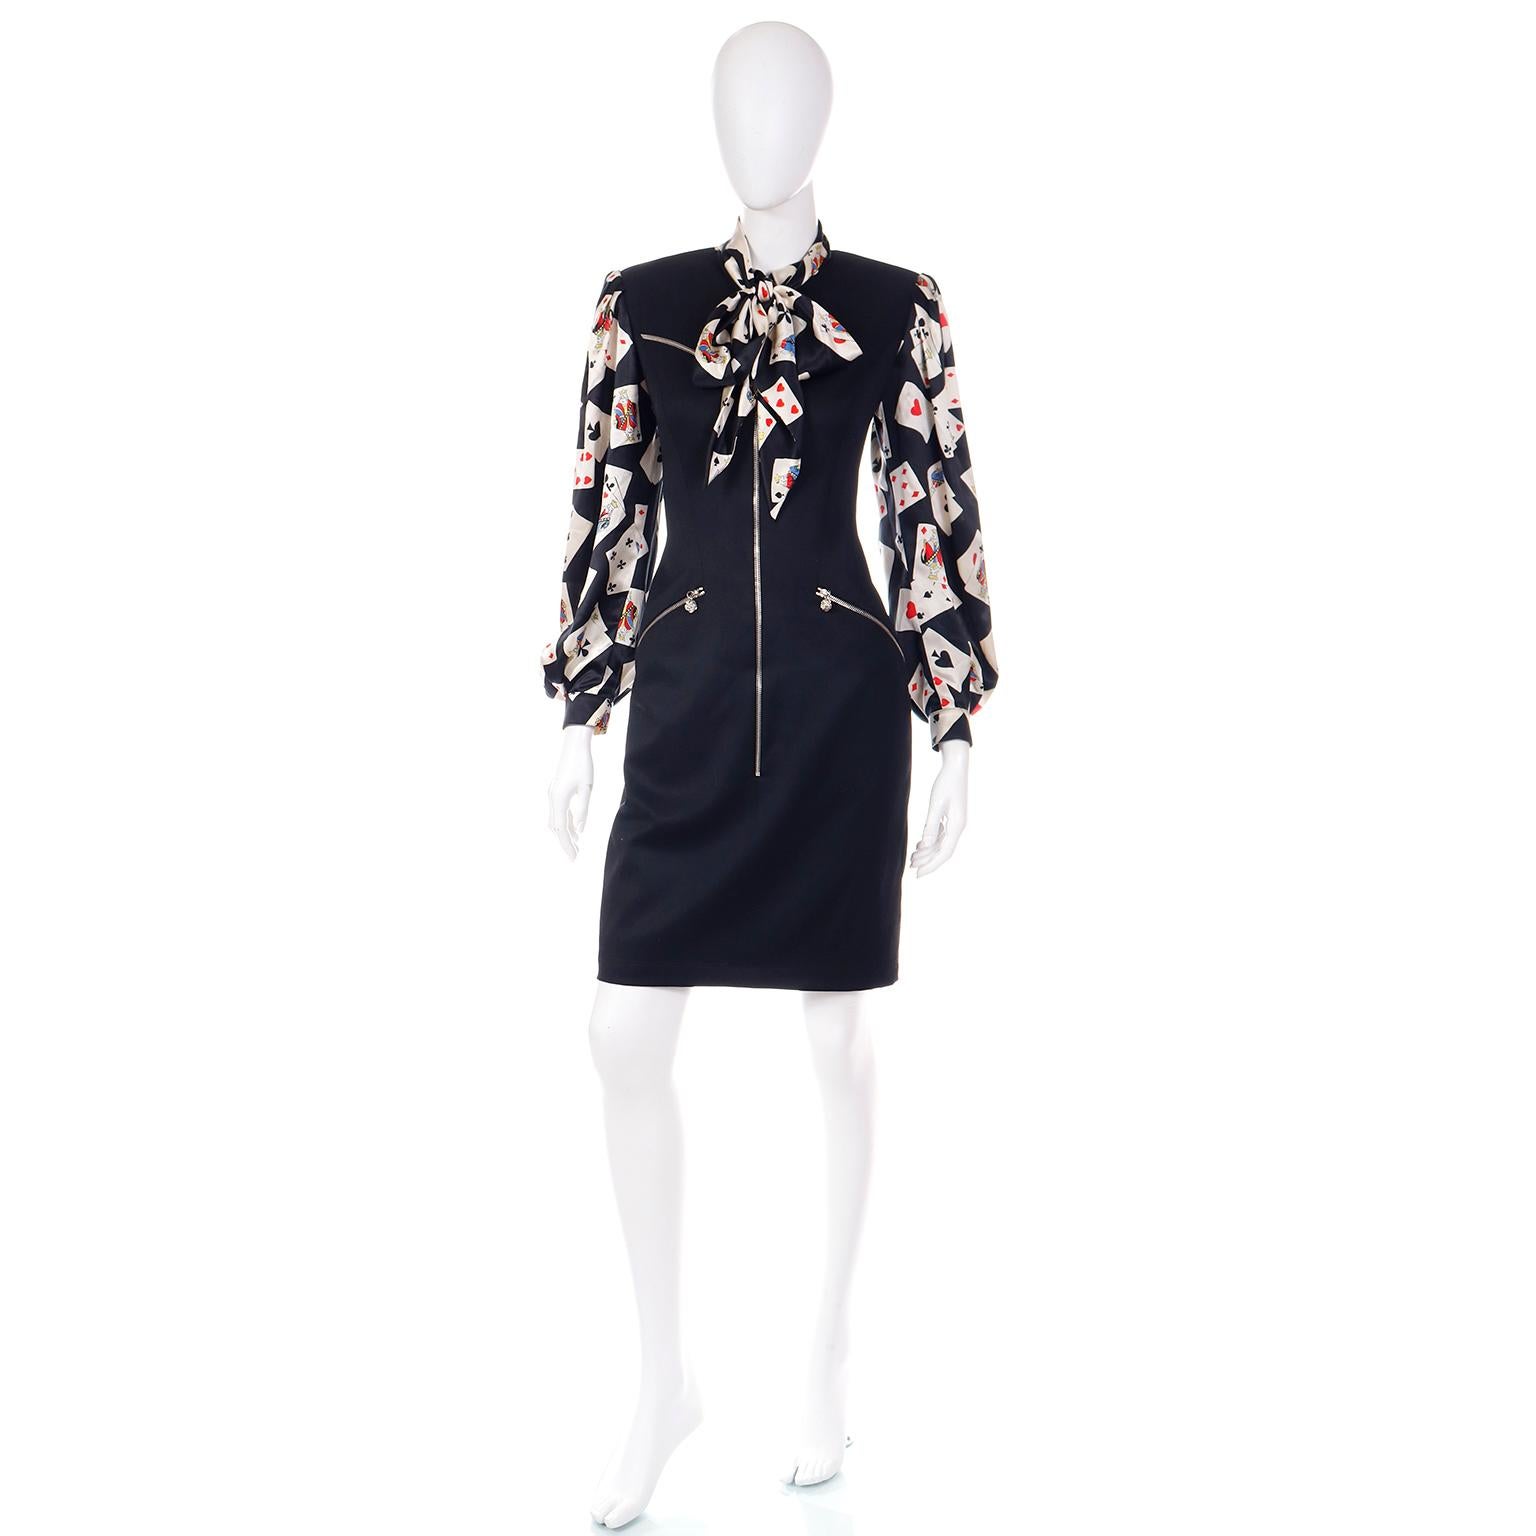 This is an incredible vintage Emanuel Ungaro black wool dress with a built in connected silk blouse in a novelty playing card print. We love Ungaro prints and this is such a fun play on a traditional blouse and dress! The blouse  has a self tie sash